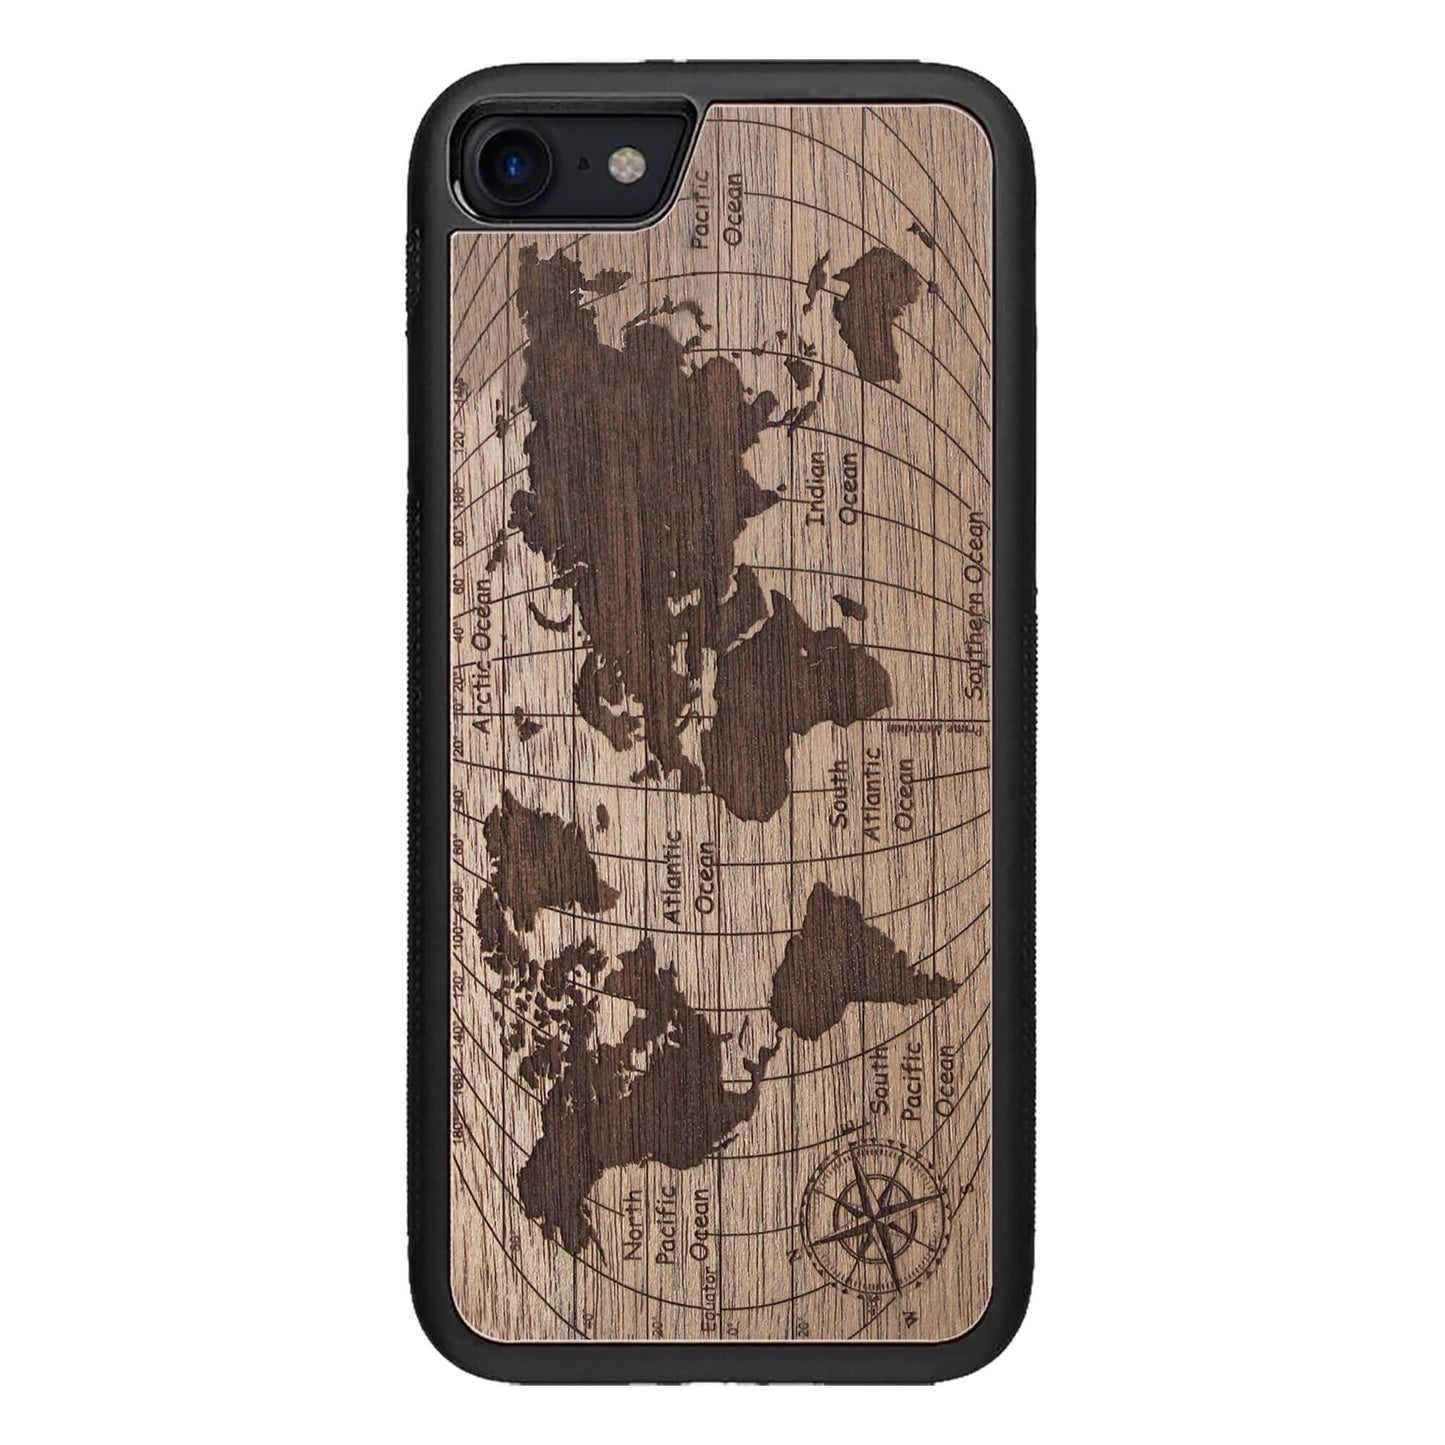 Wooden Case for iPhone SE 2 generation case World Map